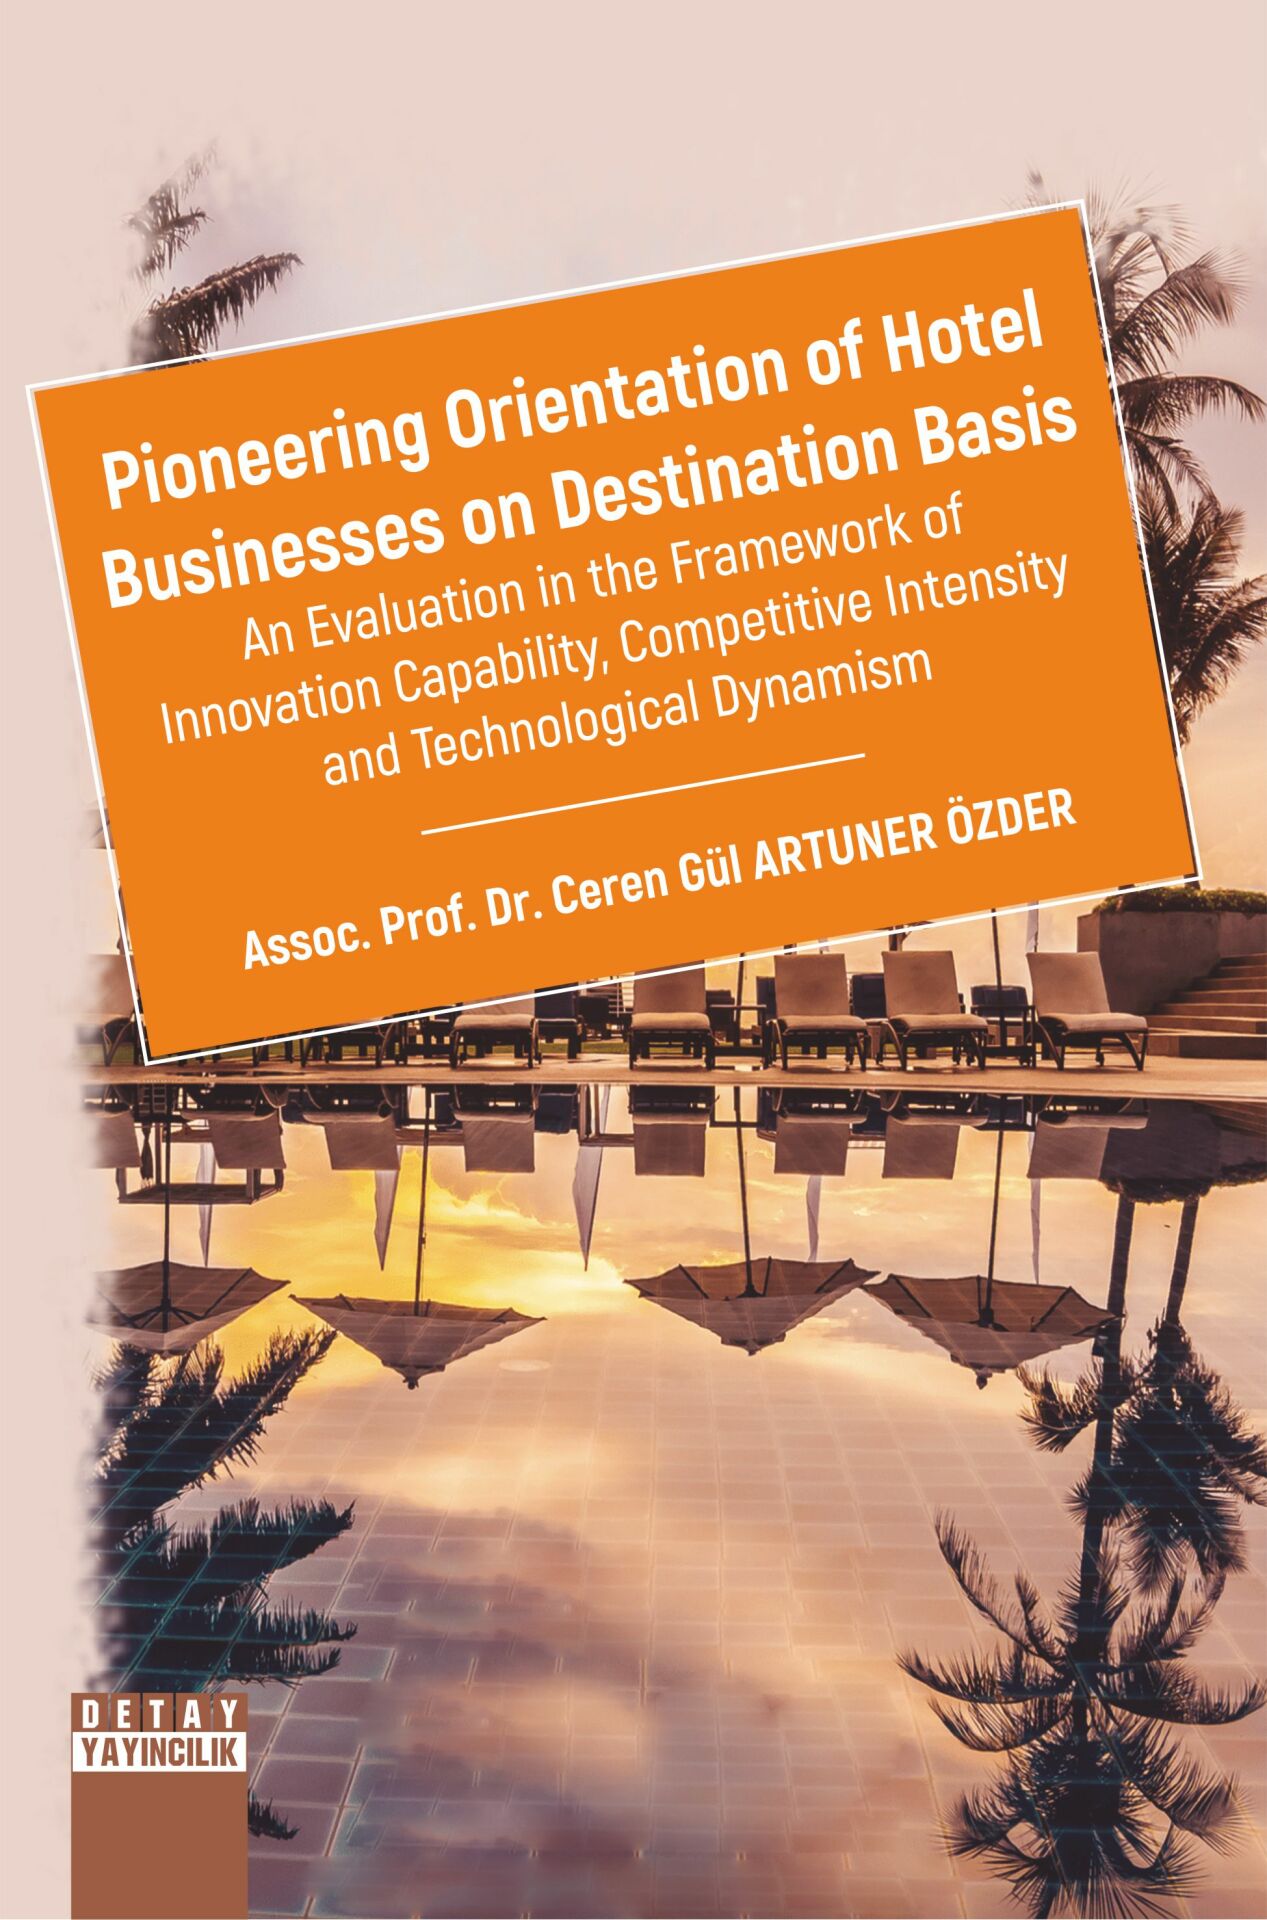 PIONEERING ORIENTATİON OF HOTEL BUSINESSES ON DESTINATION BASIS An Evaluation in the Framework of Innovation Capability, Competitive Intensity and Technological Dynamism